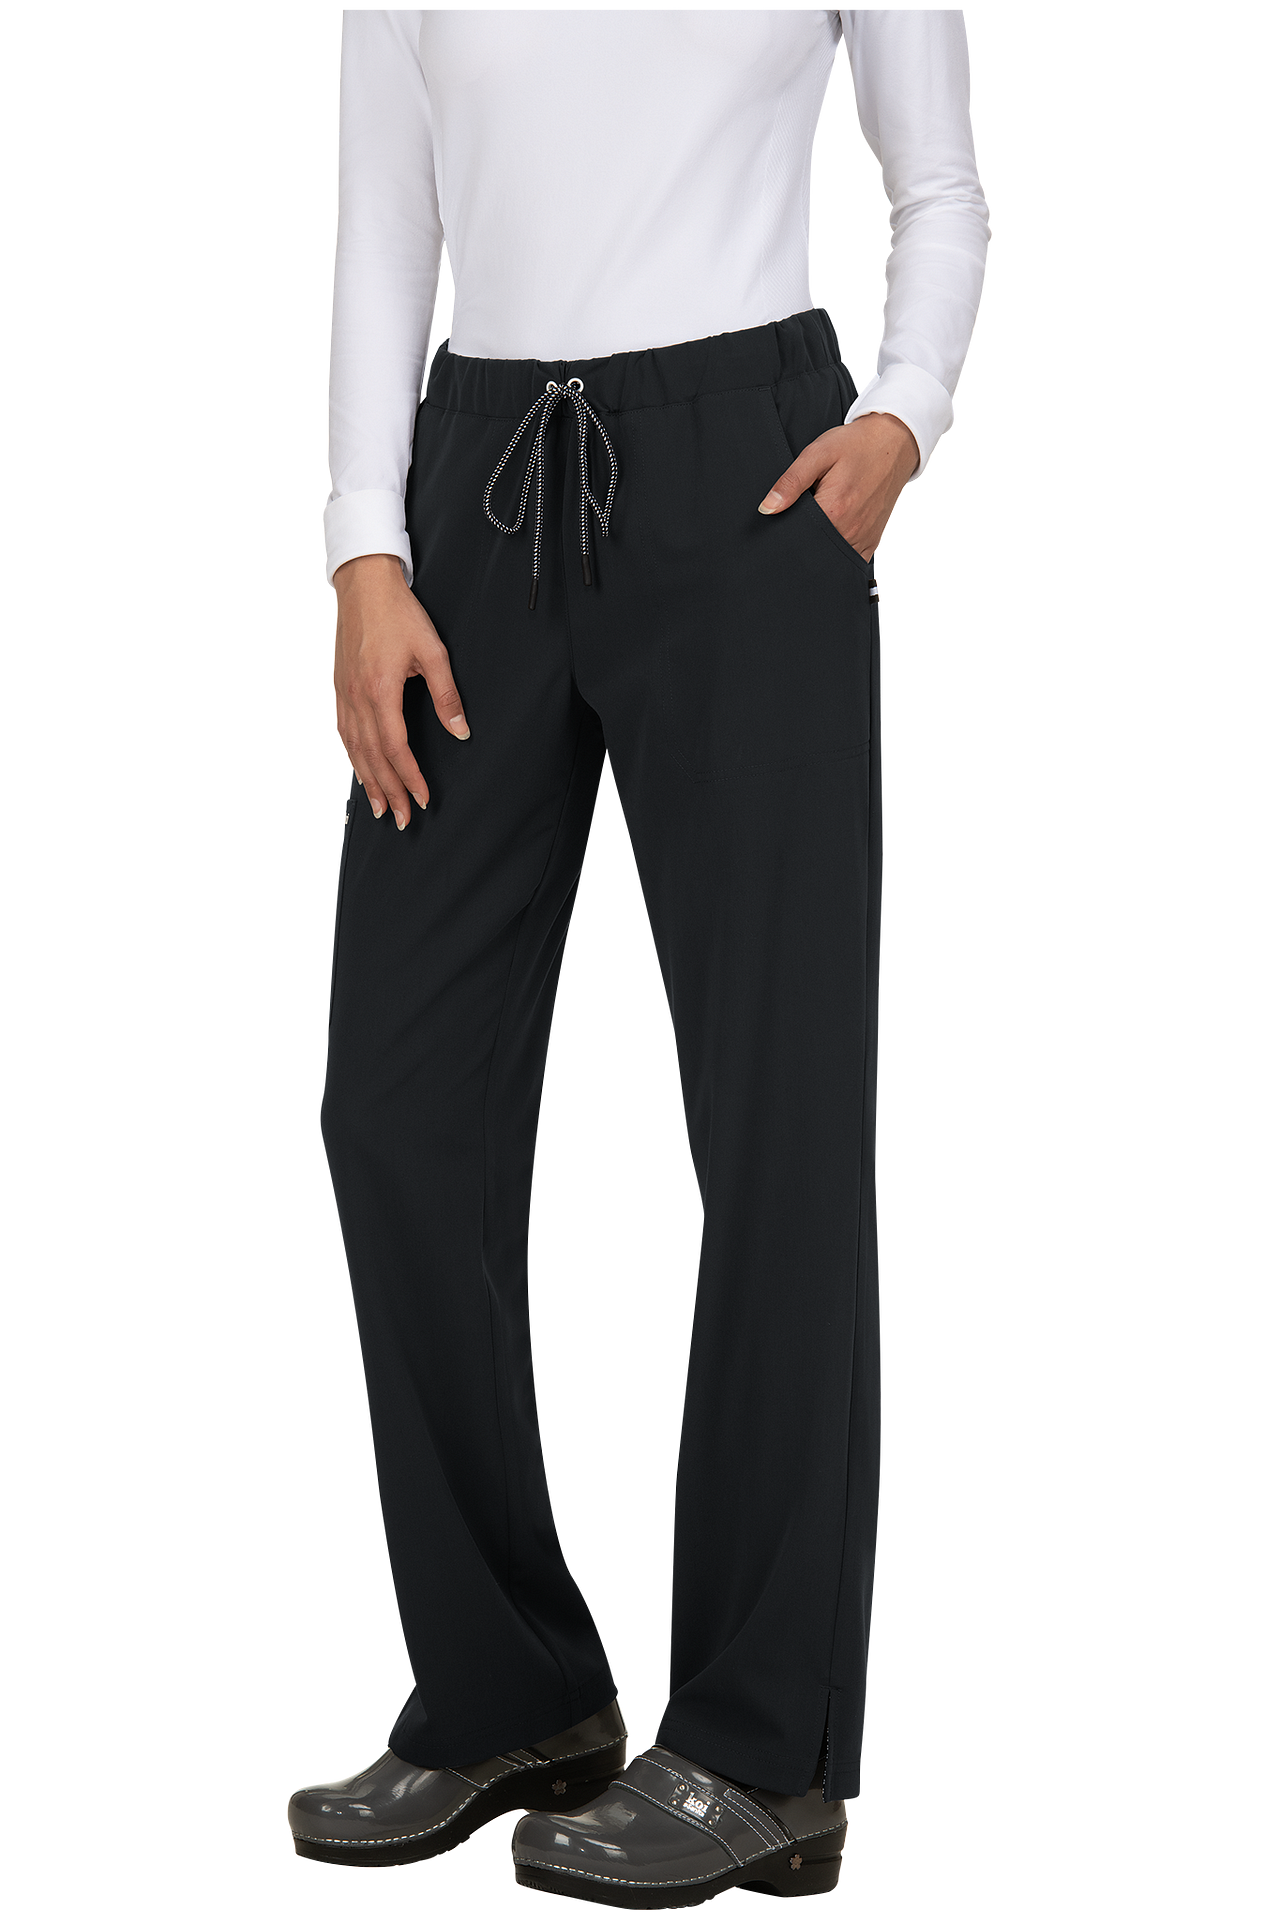 Koi Scrub Pant Next Gen Everyday Hero in Black at Parker's Clothing & Shoes.